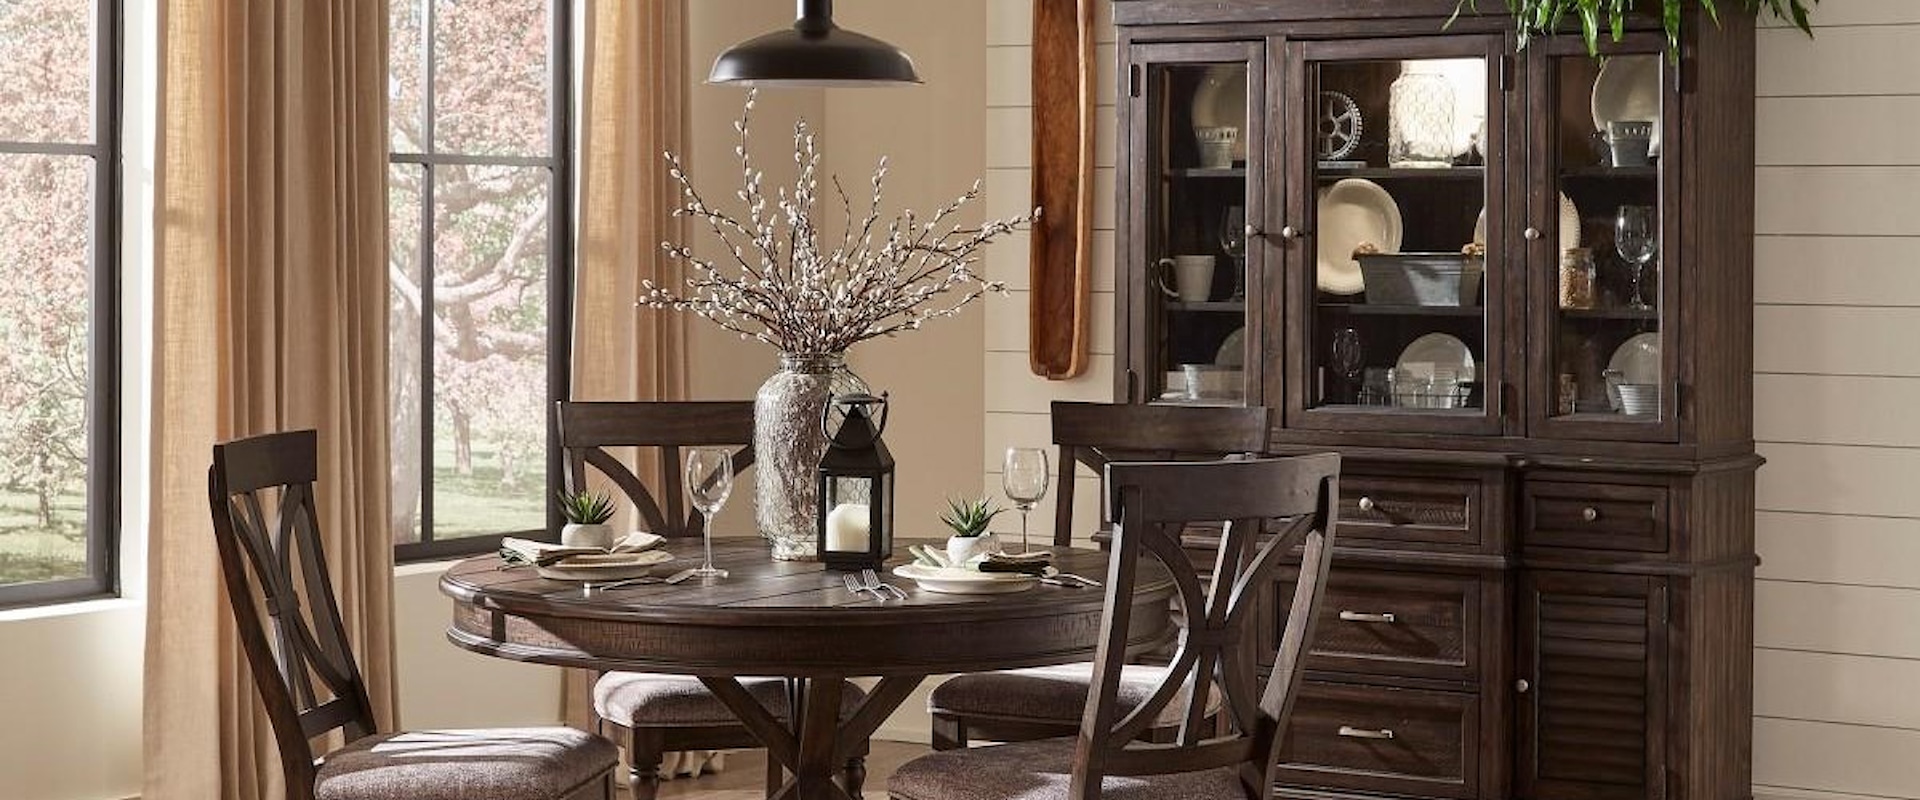 5-Piece Dining Set with Upholstered Chairs